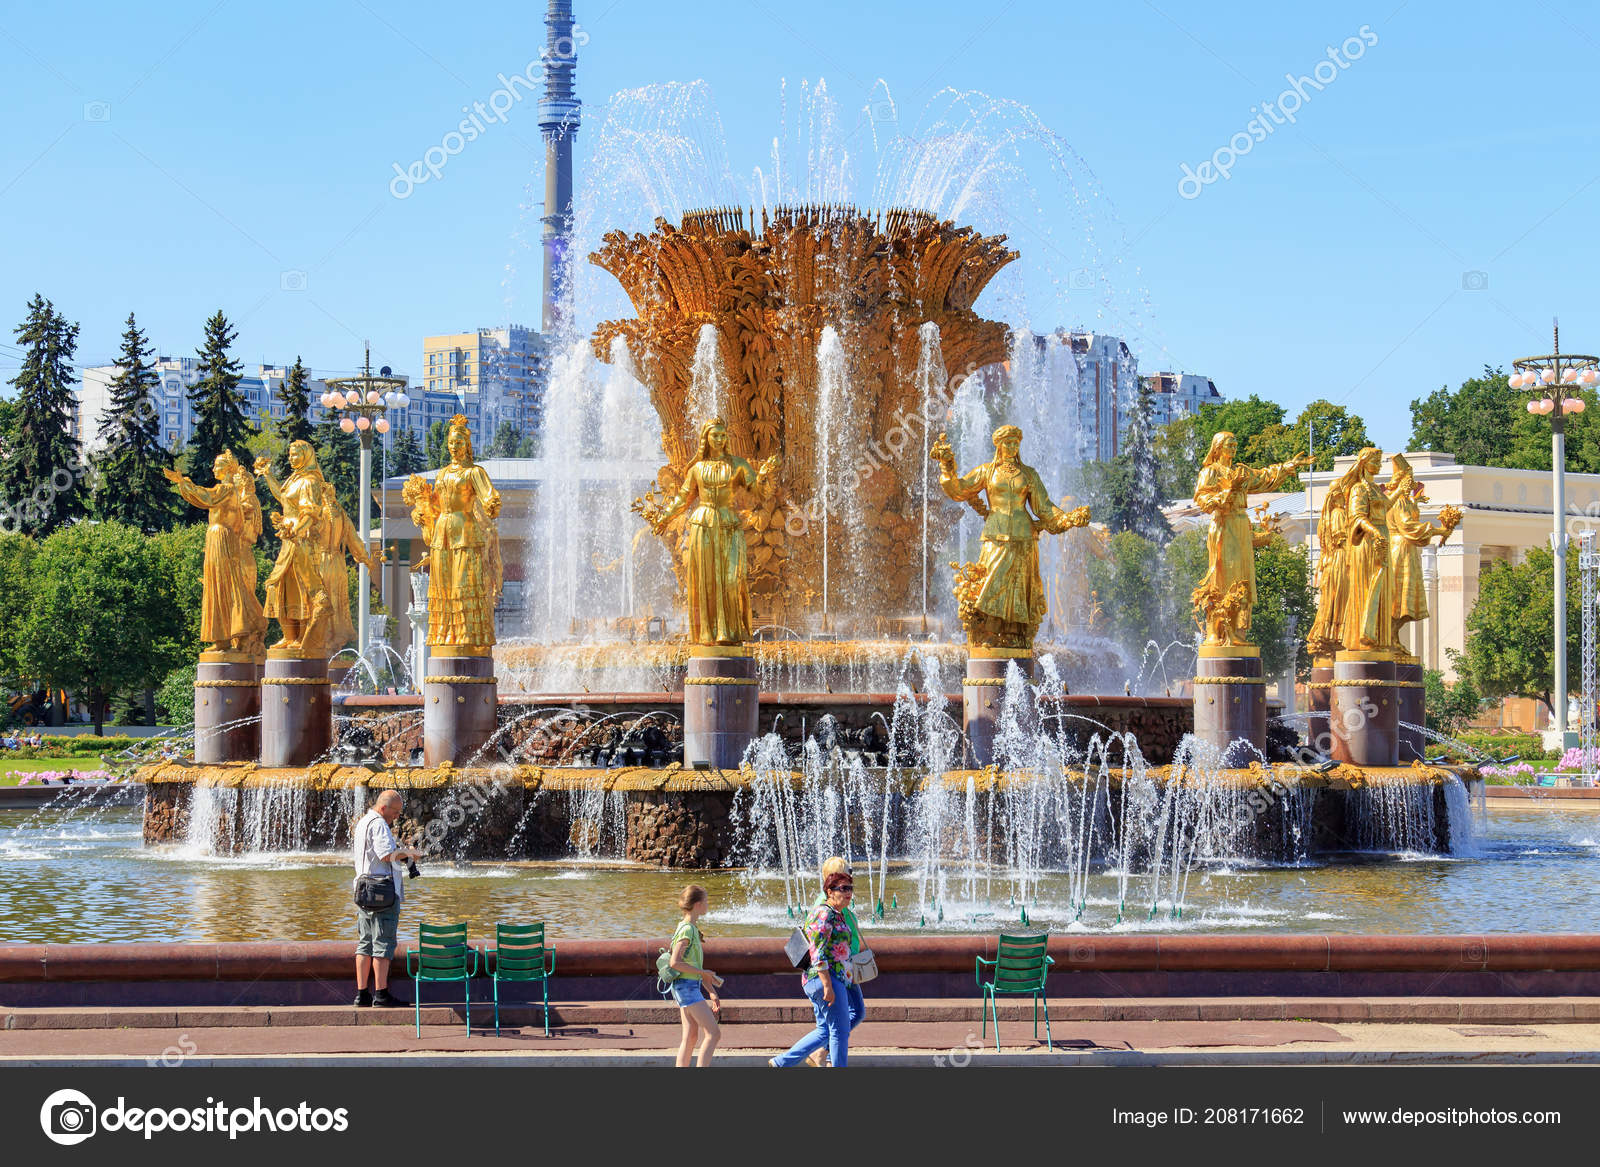 depositphotos 208171662-stock-photo-moscow-russia-august-2018-tourists